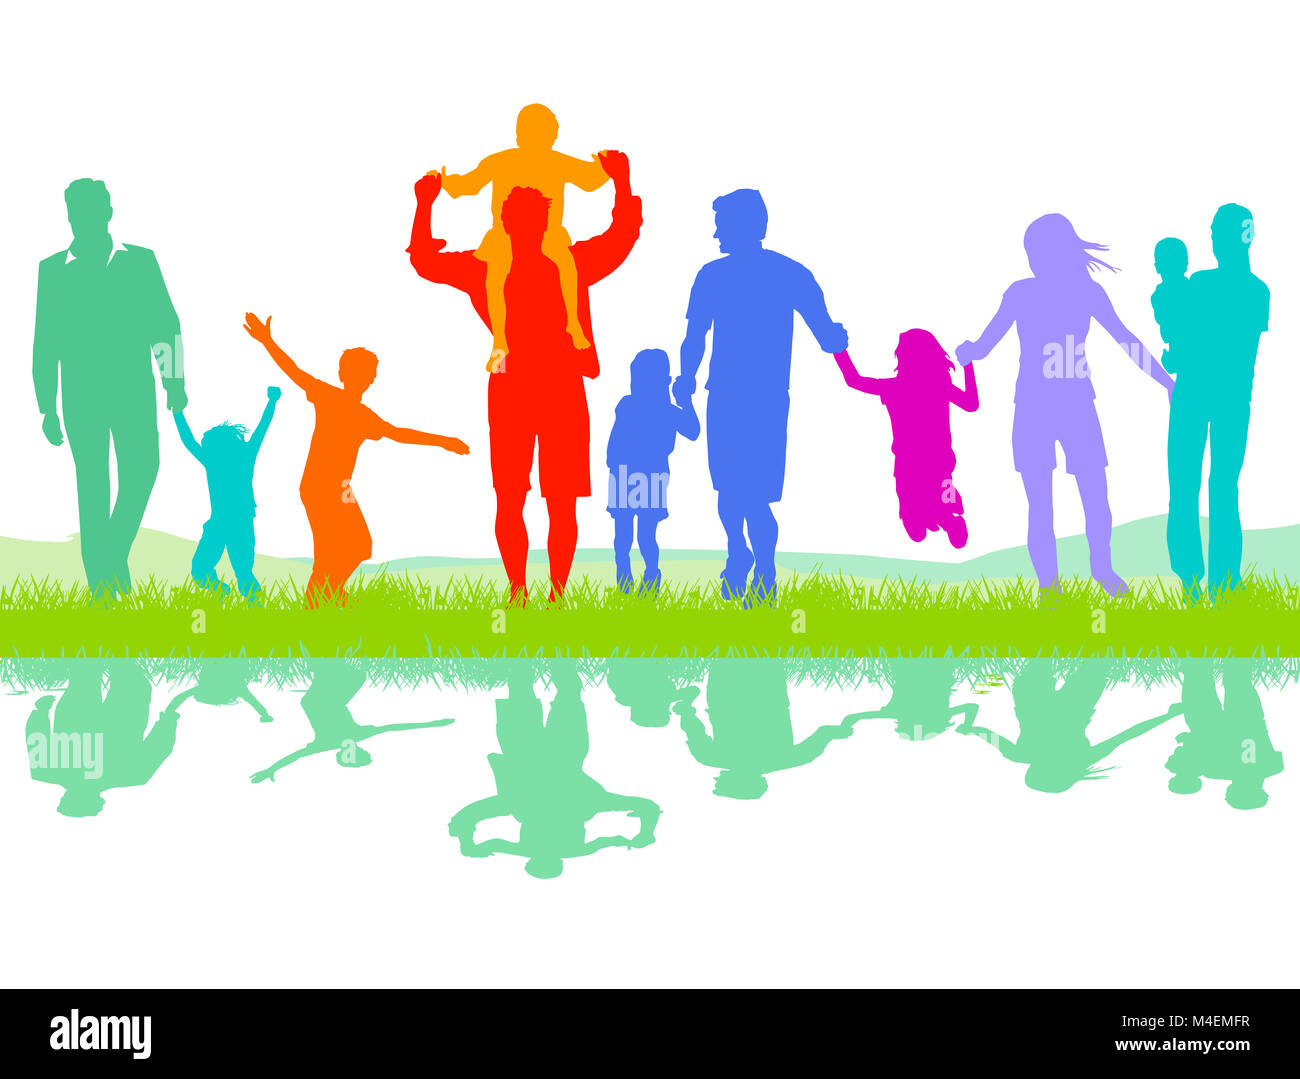 Cheerful parents group with children Stock Photo